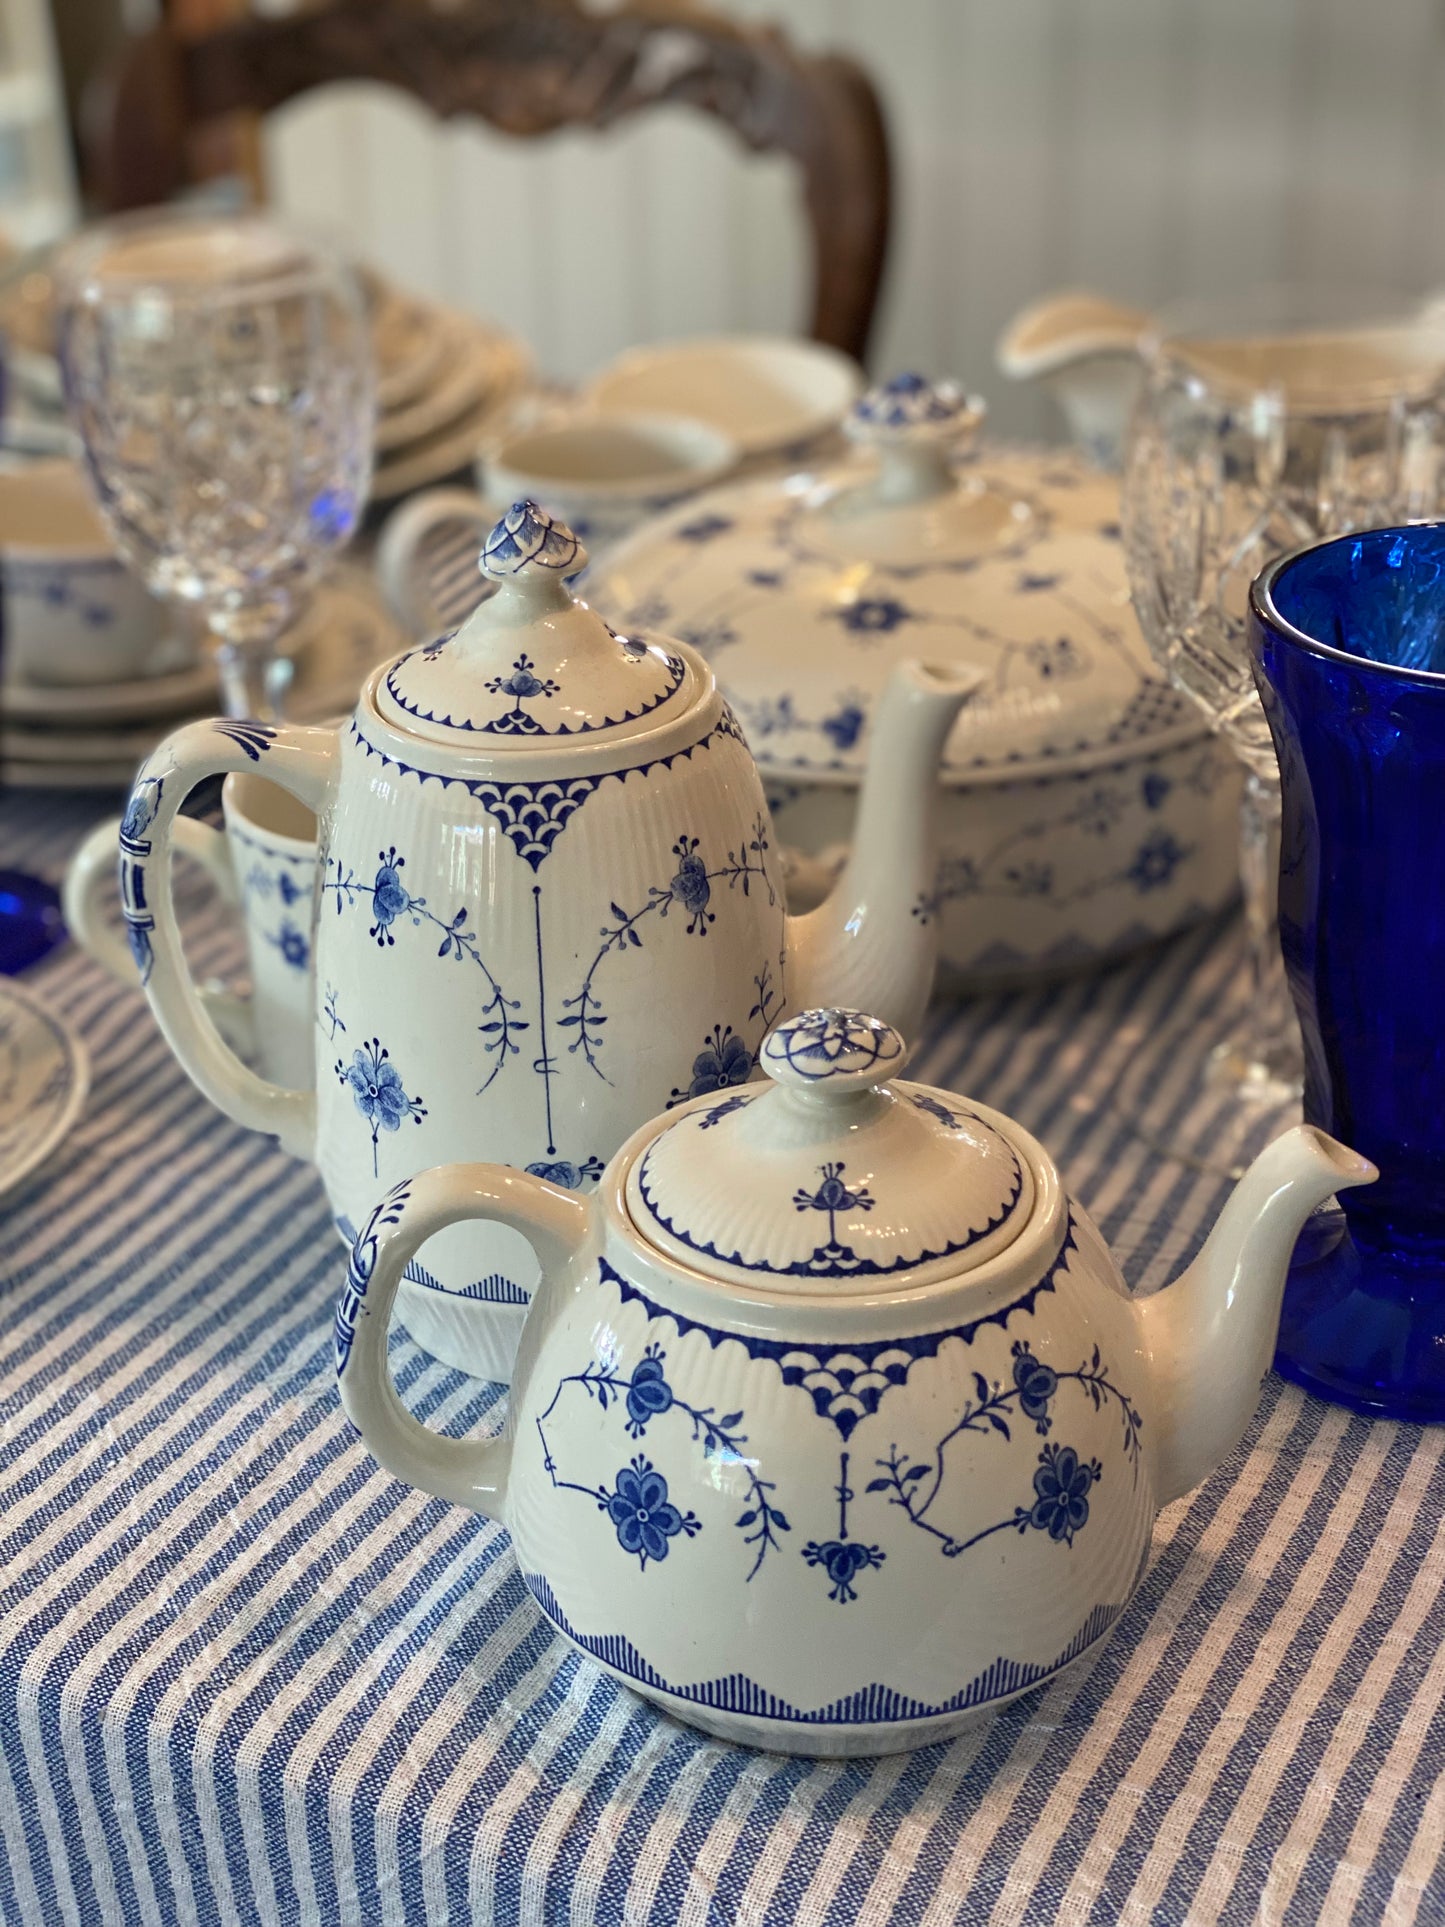 Vintage Blue & White “Denmark” China, Made in England by Furnivals. 75+ pcs. Available, Sold Separately